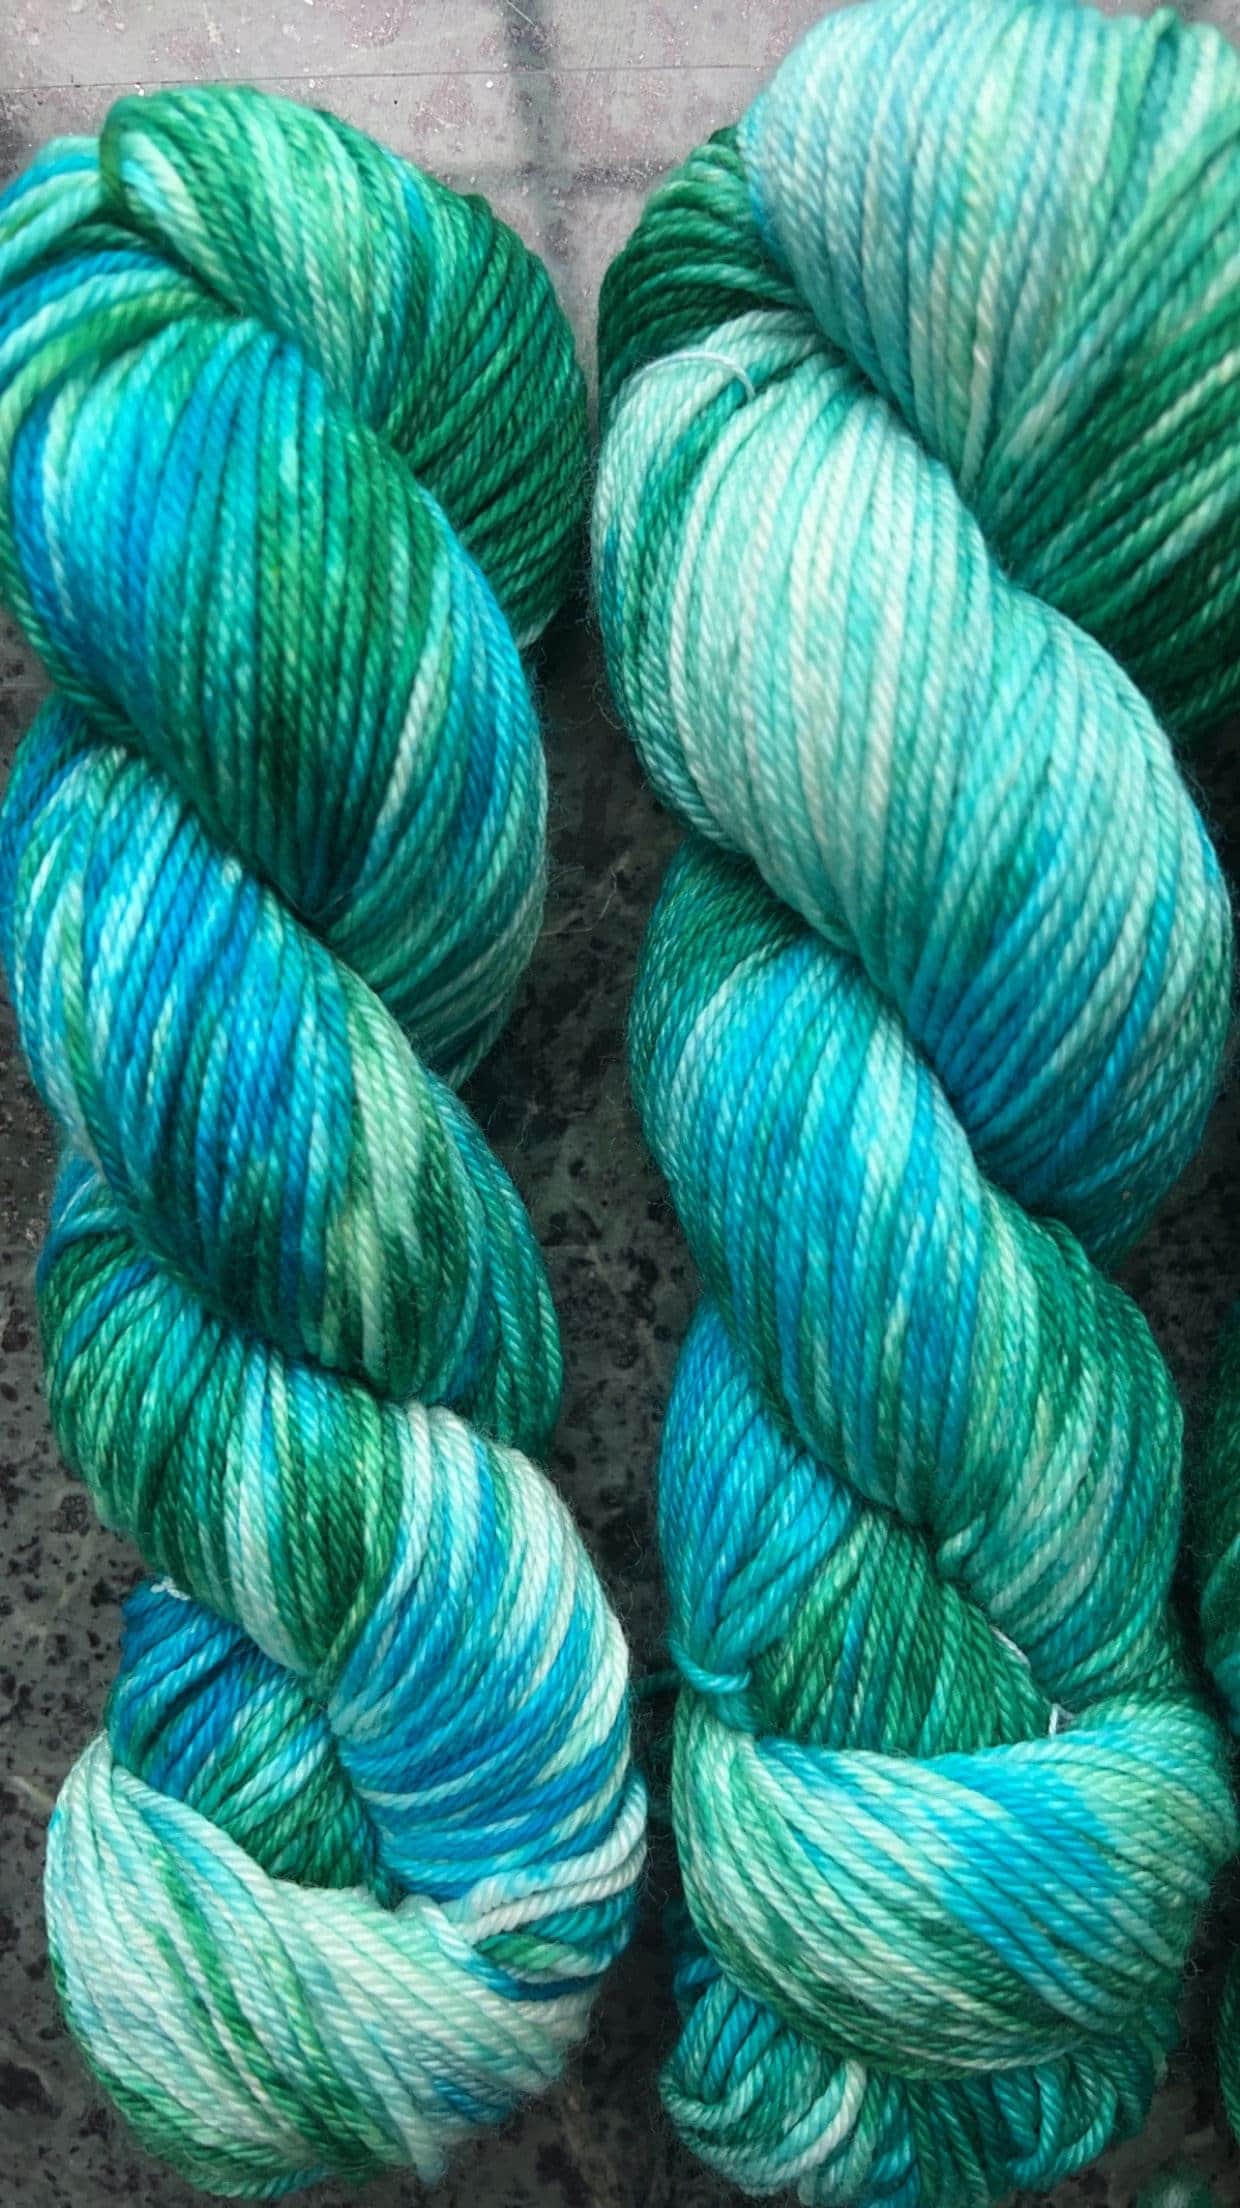 Hand-Dyed Merino Wool Yarn - Soft and Durable Yarn for Knitting and Crocheting | Indie Dyed Merino Wool | Worsted | Rainbow on the Sea